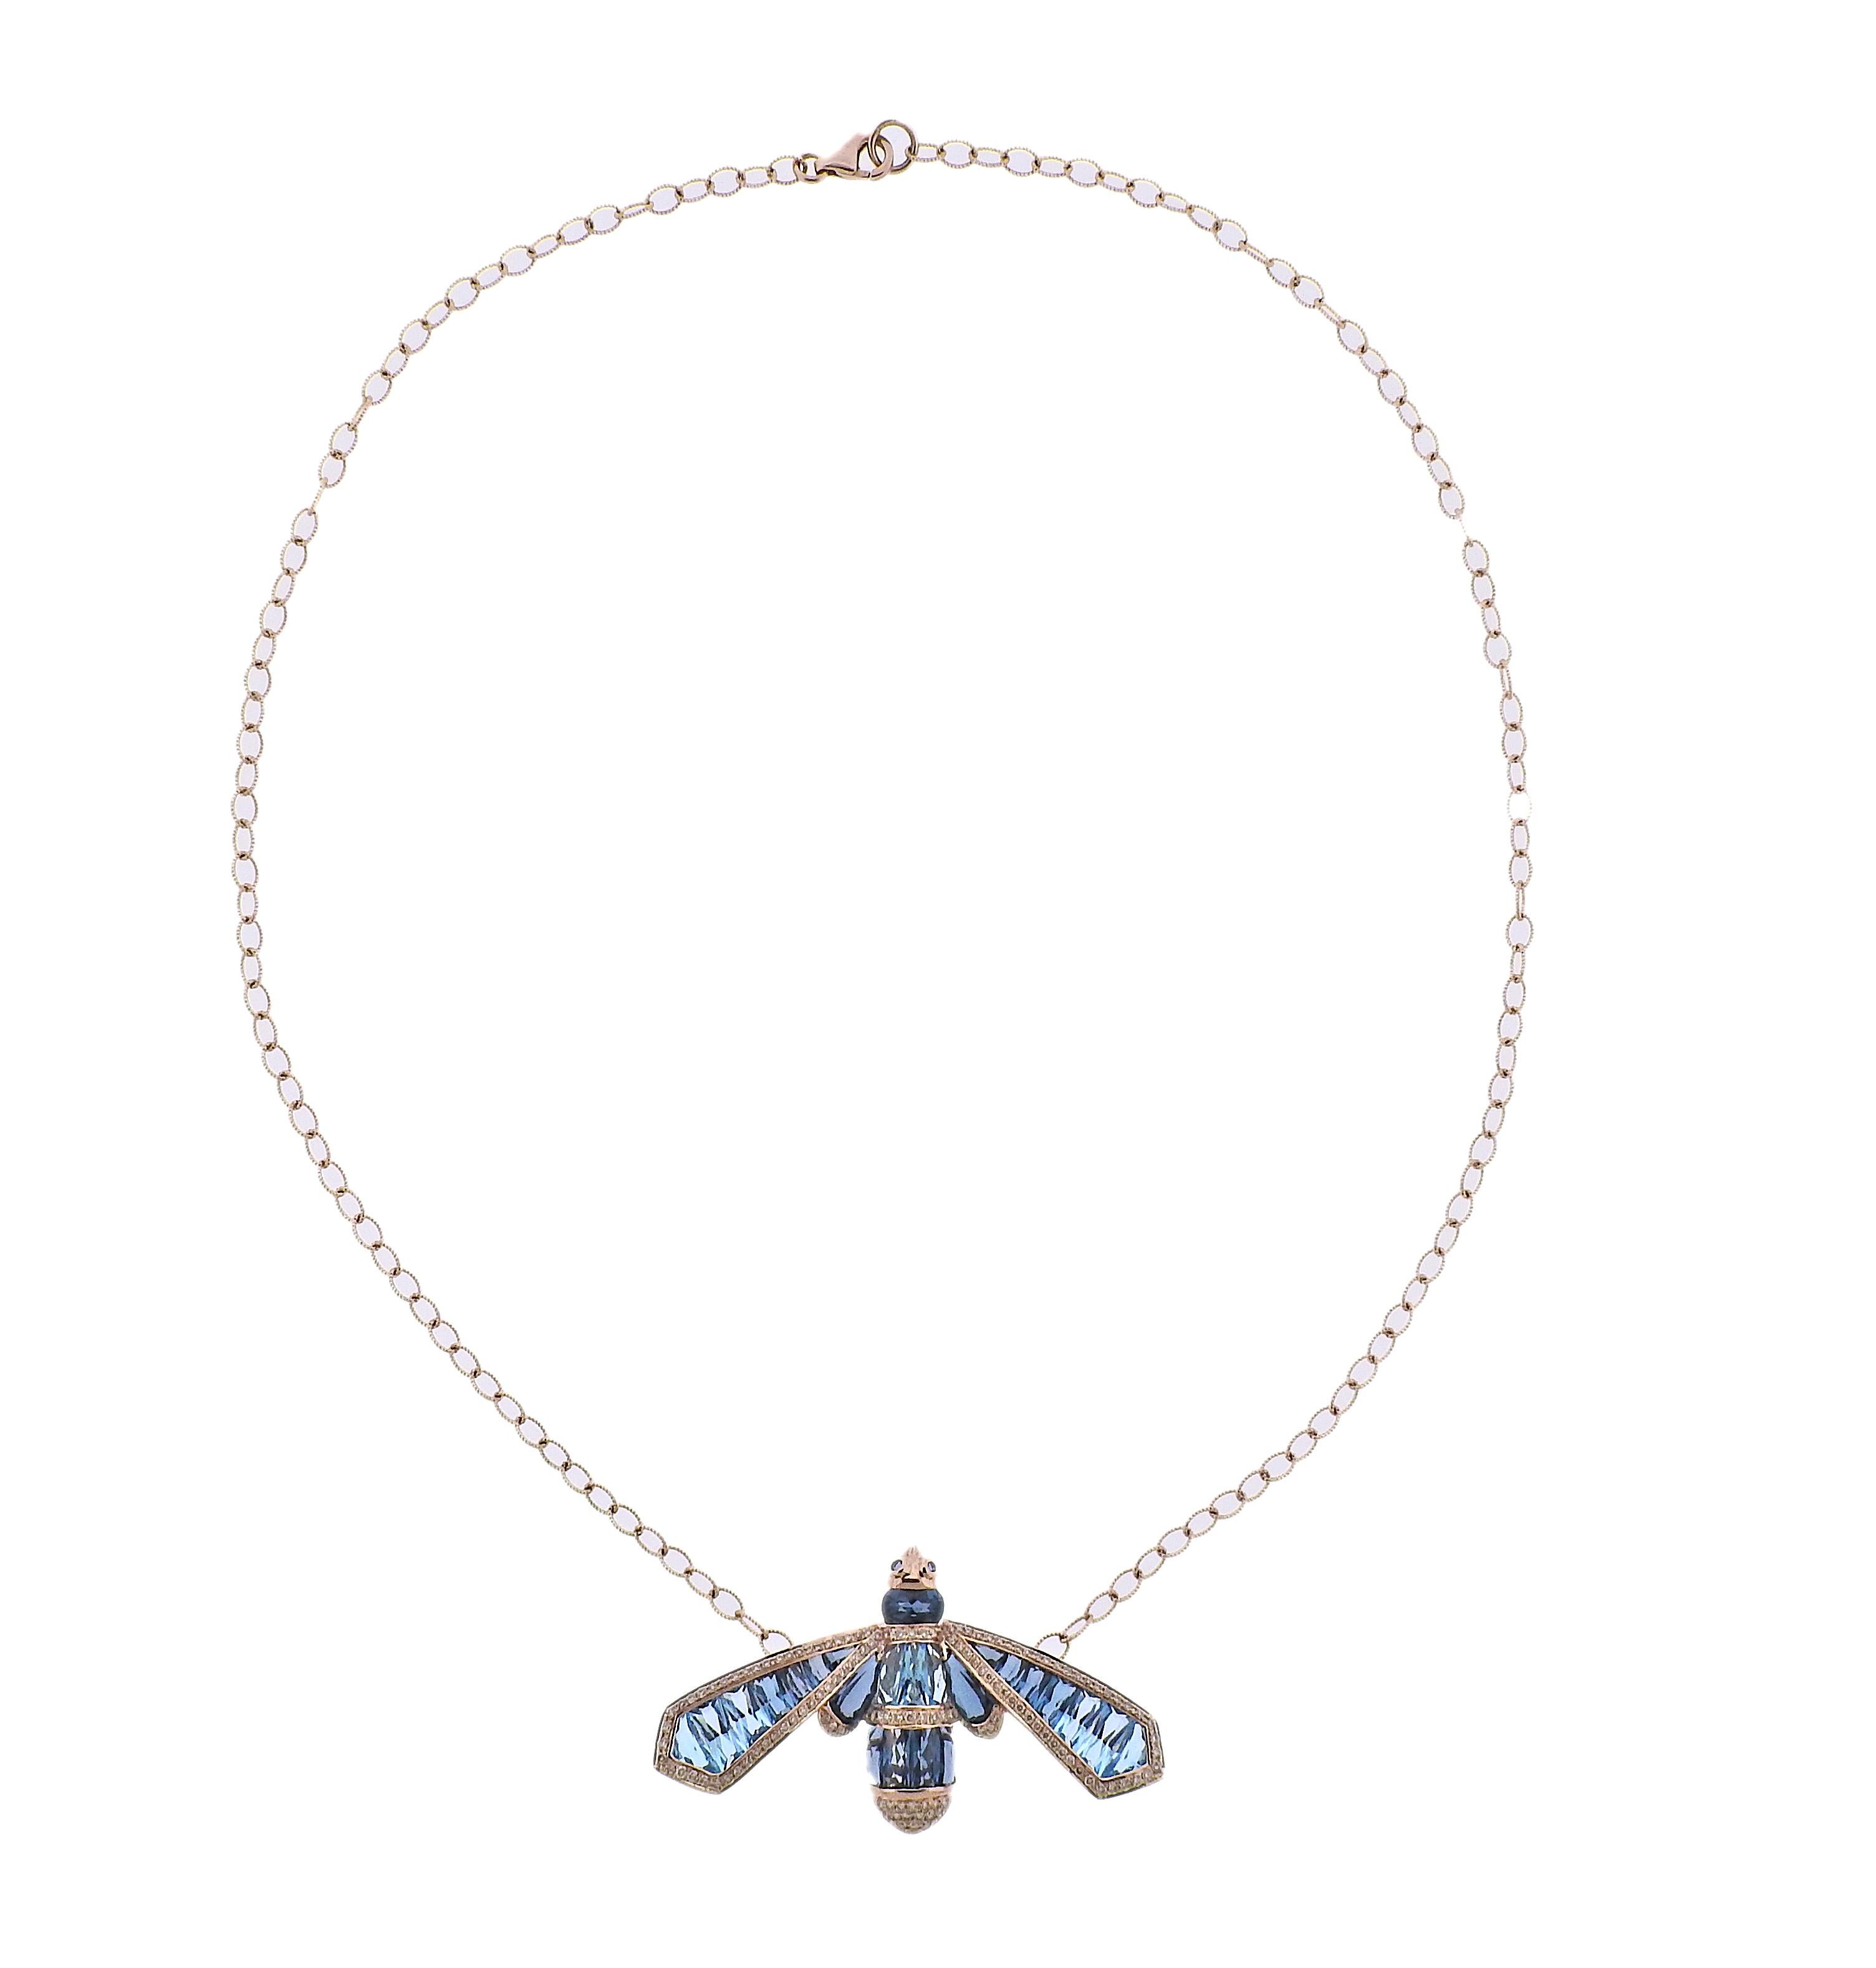 Featuring 14k rose gold pendant necklace from Queen Bee collection, set with 0.52ctw in H/VS diamonds and 8.35ctw in blue topaz, with 0.04ctw sapphire eyes. All Bellarri jewelry is brand new with tags. Necklace is 16.75